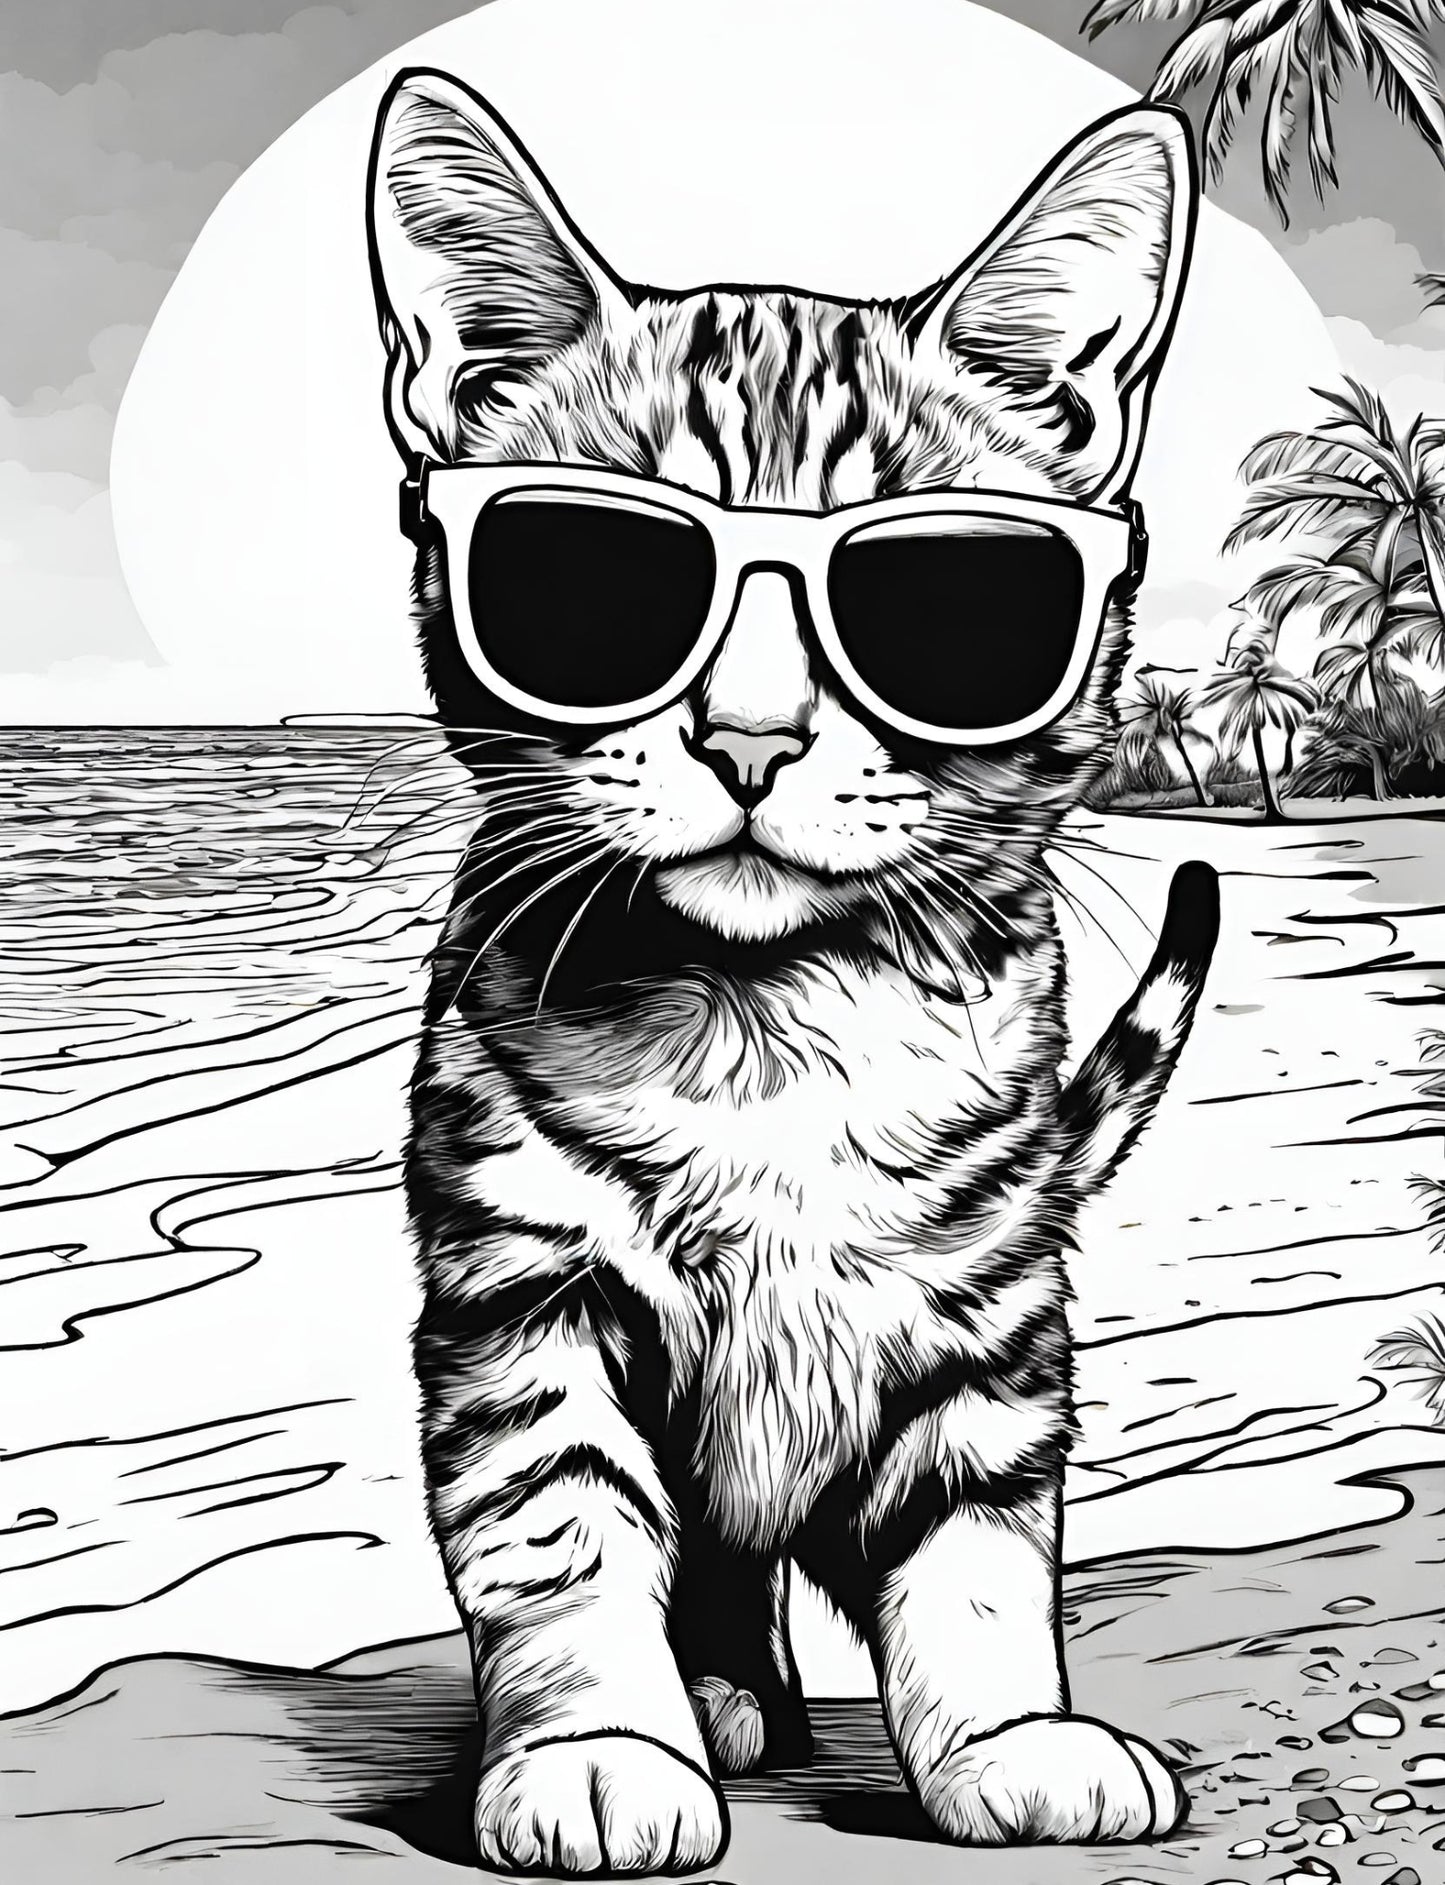 Sticky the Kitty - Beachcomber Sticky Coloring Book (It's really for you, parents!) Begins shipping May 19th